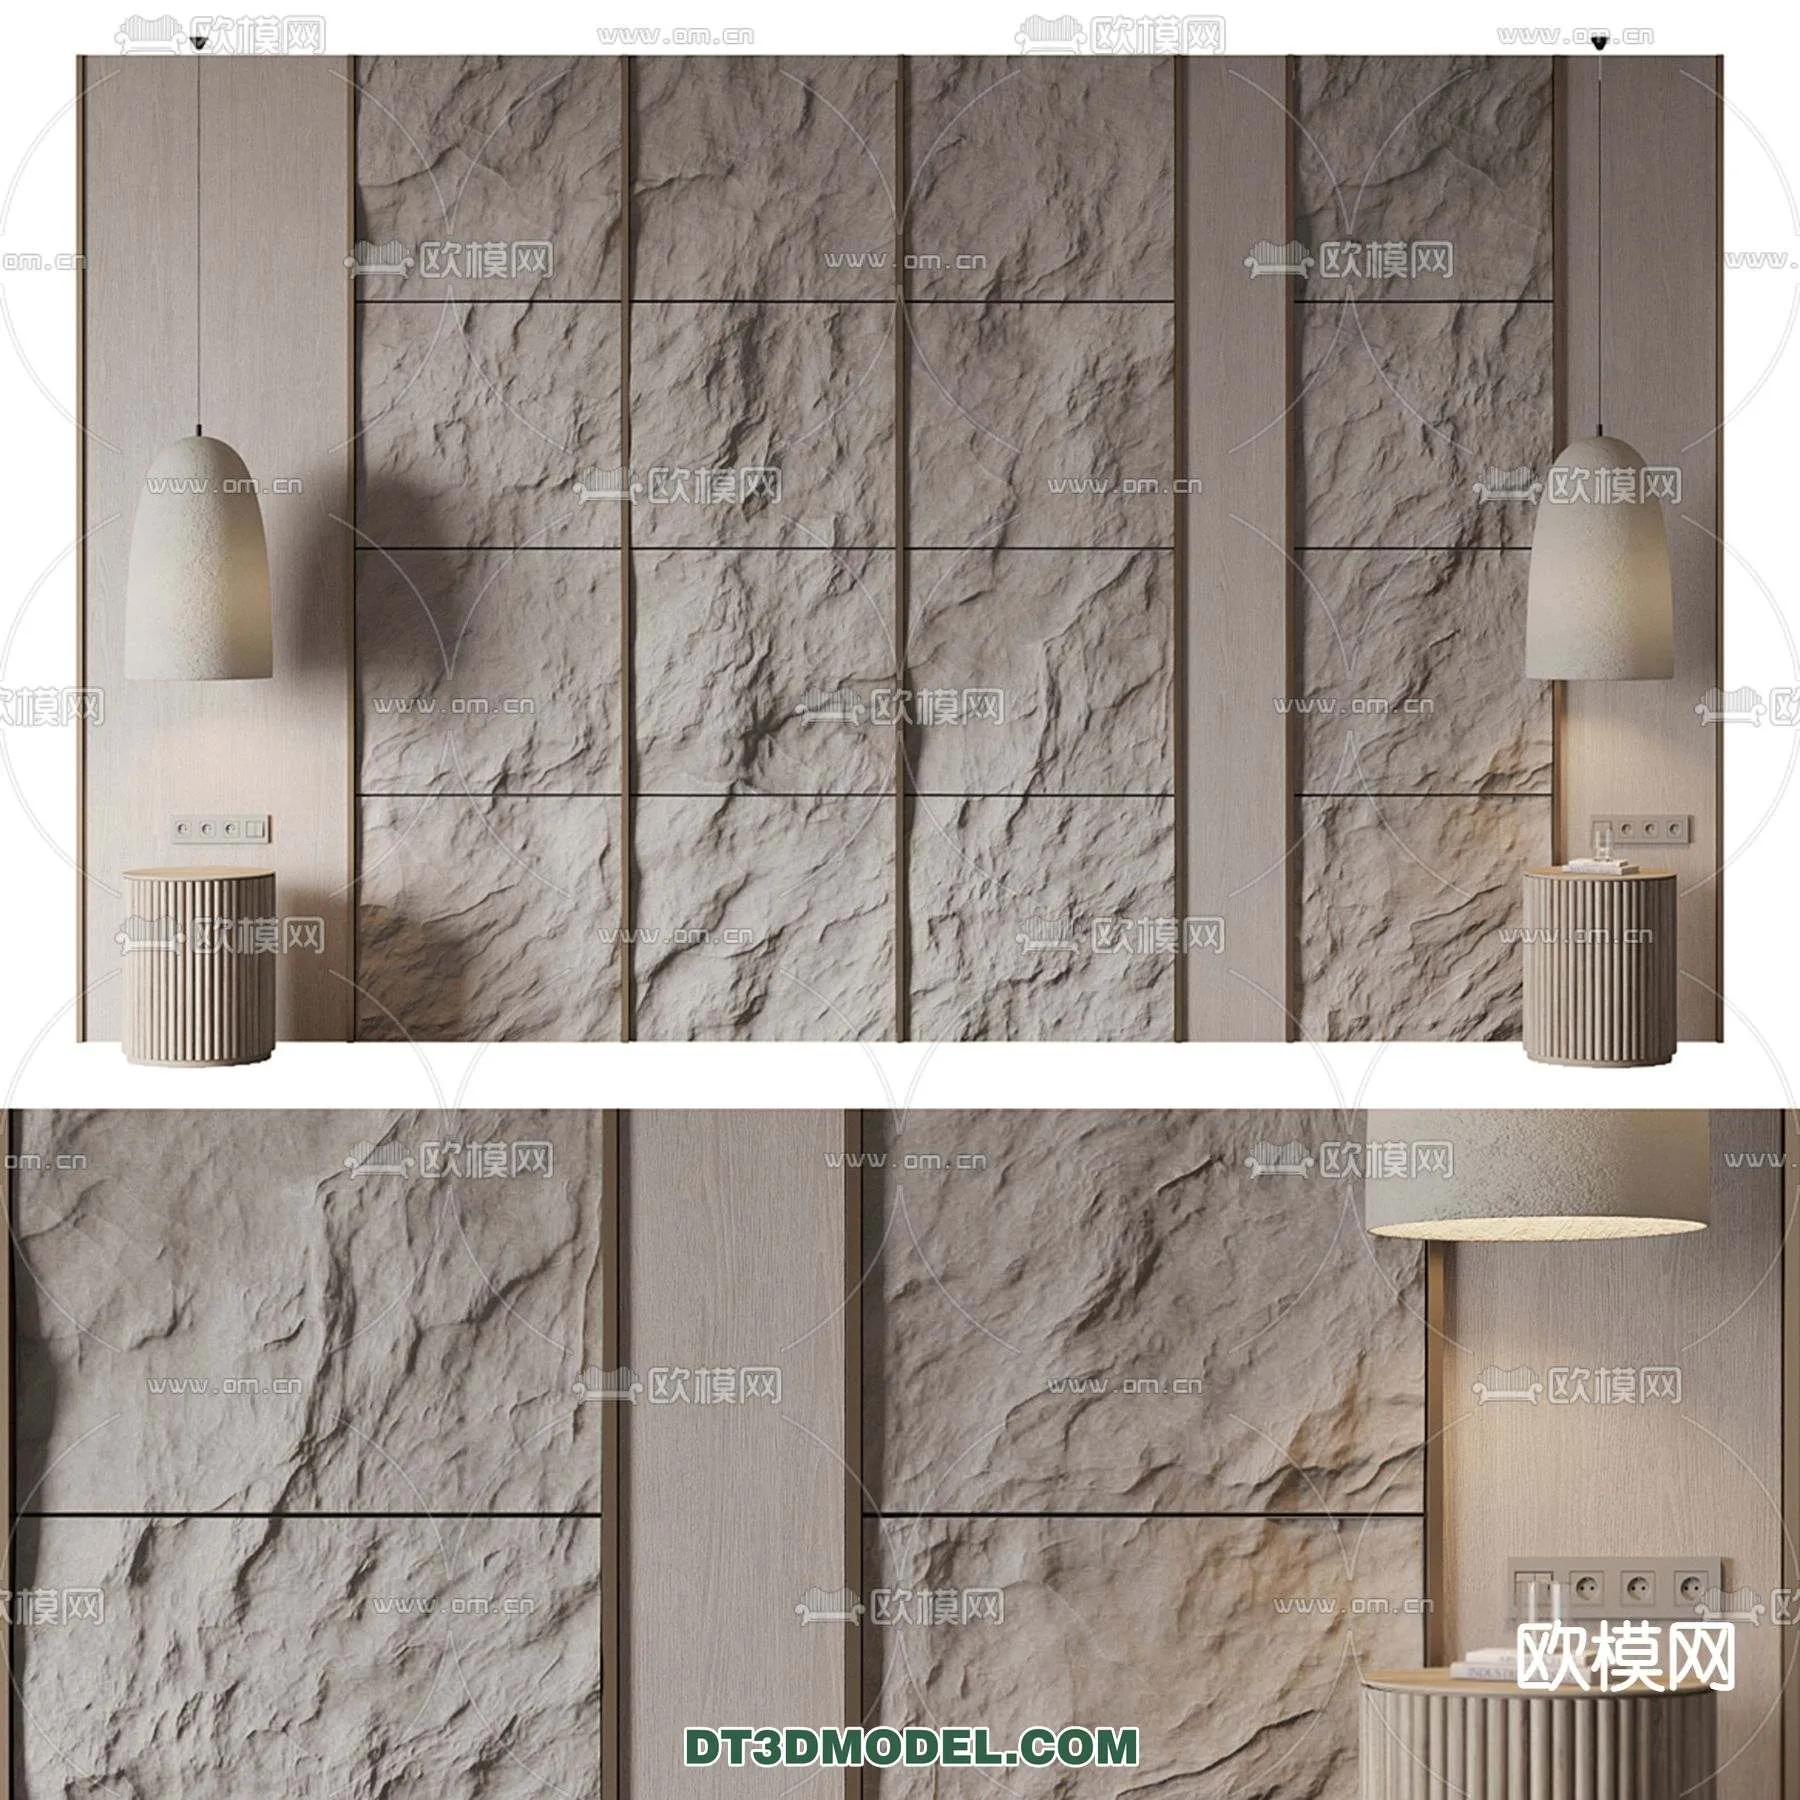 MATERIAL – TEXTURES – ROCK WALL – 0035